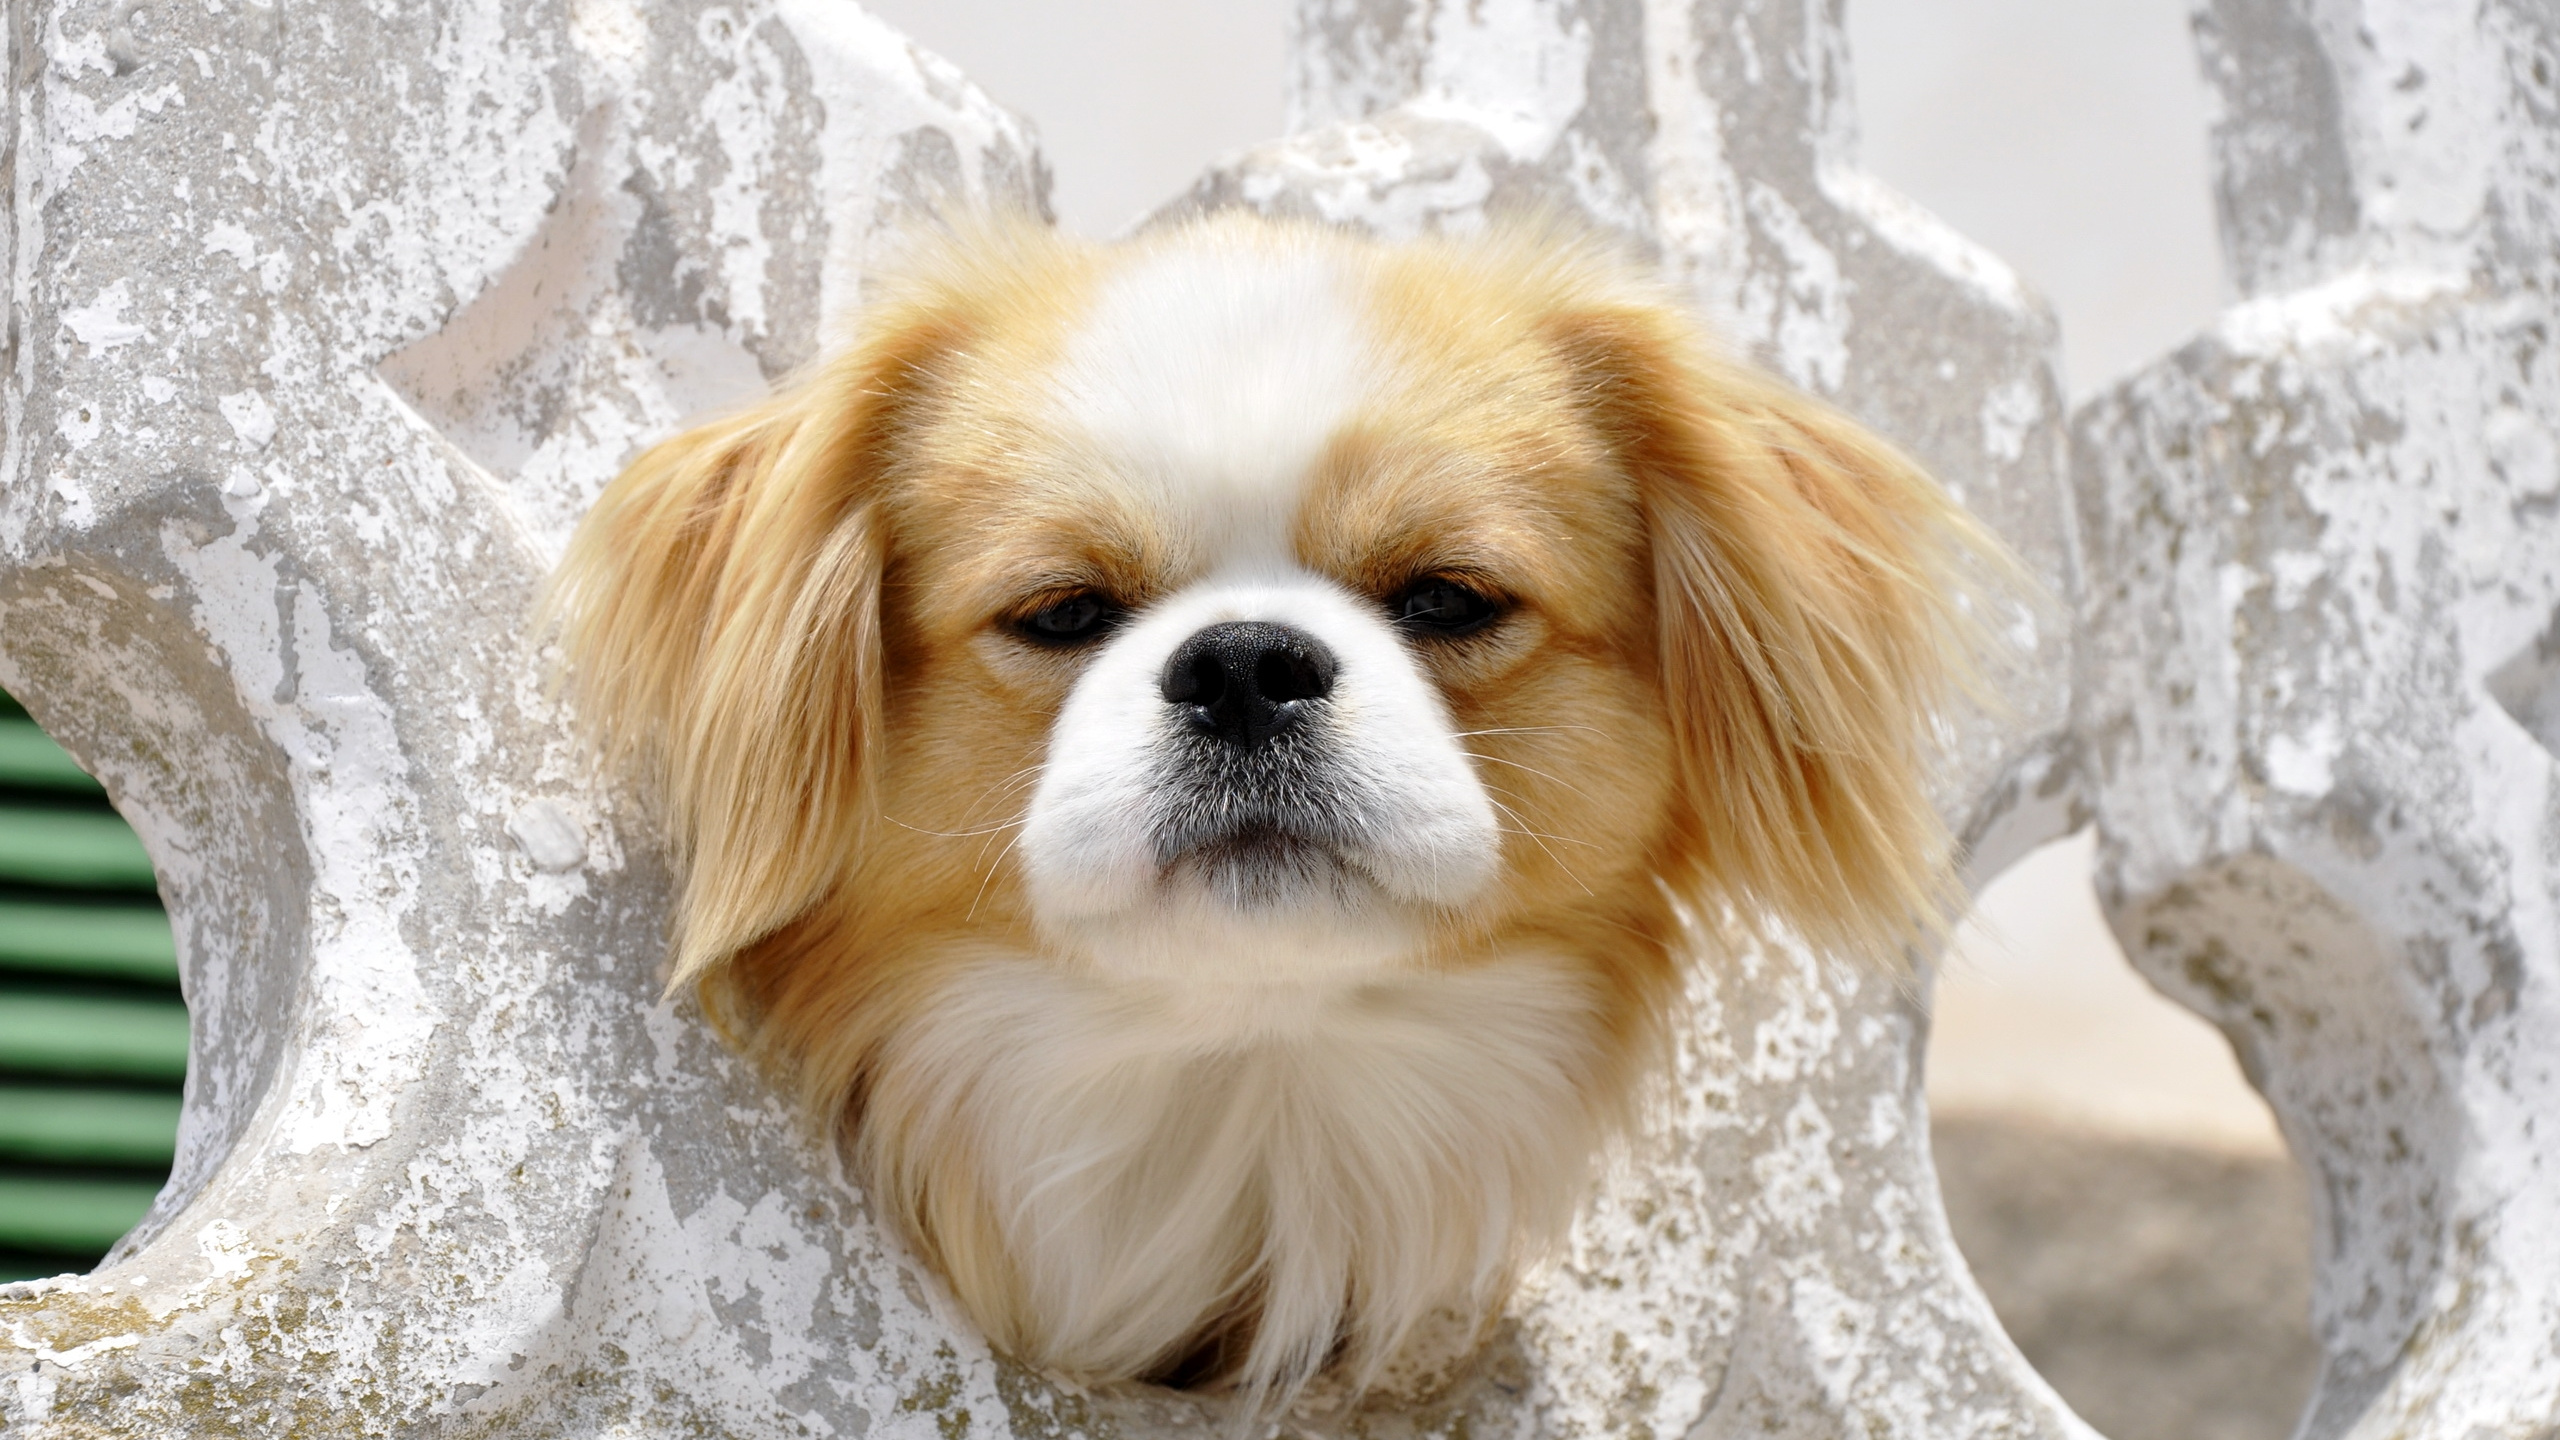 White and Brown Long Haired Small Dog. Wallpaper in 2560x1440 Resolution